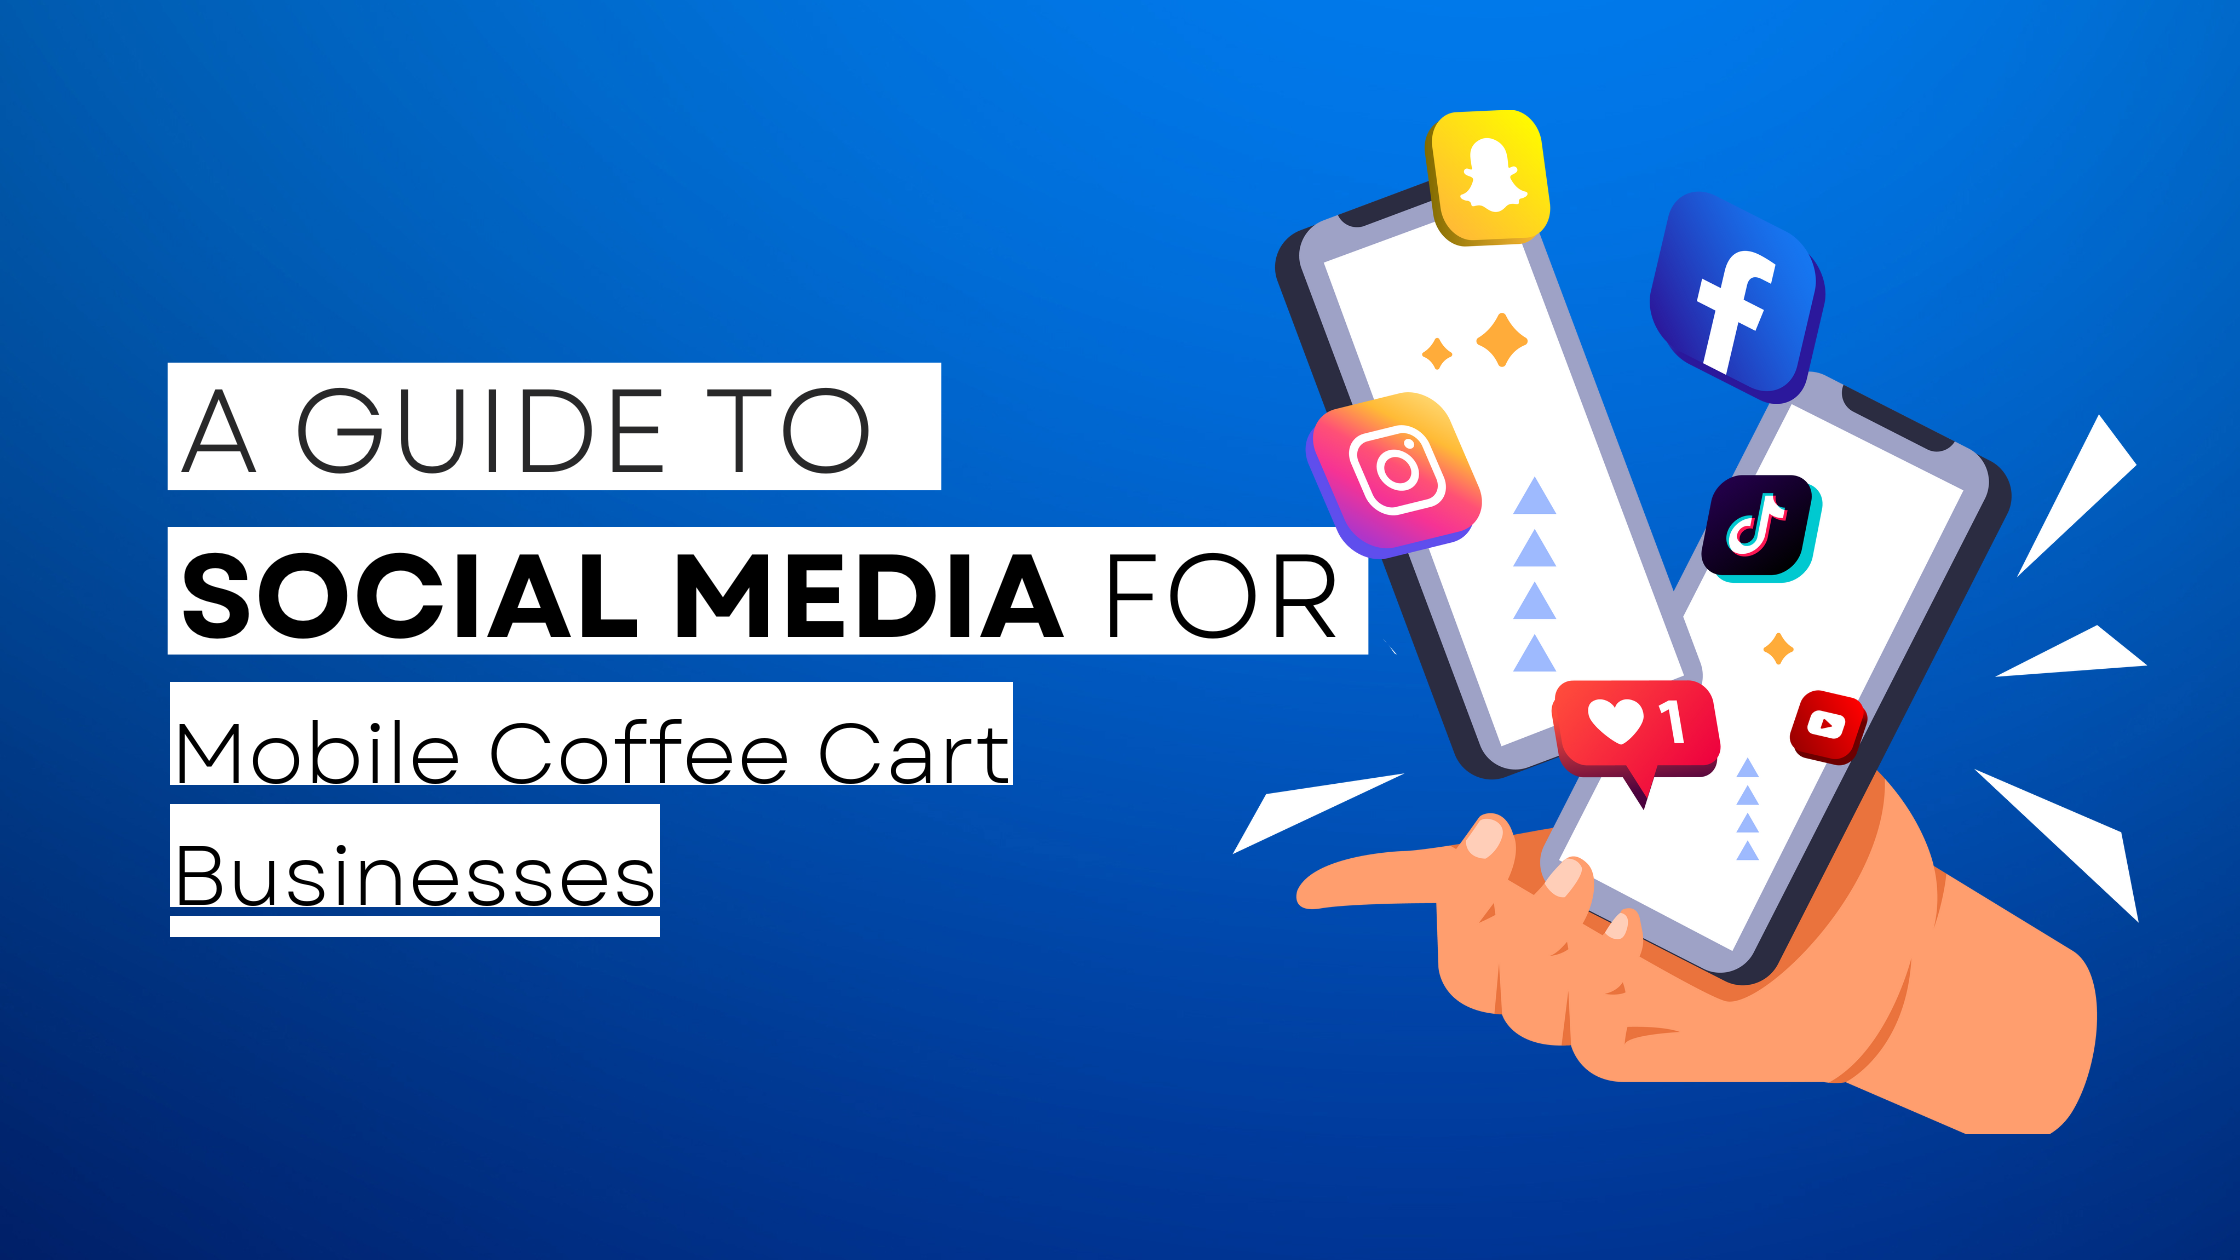 How to start Mobile Coffee Cart  on social media